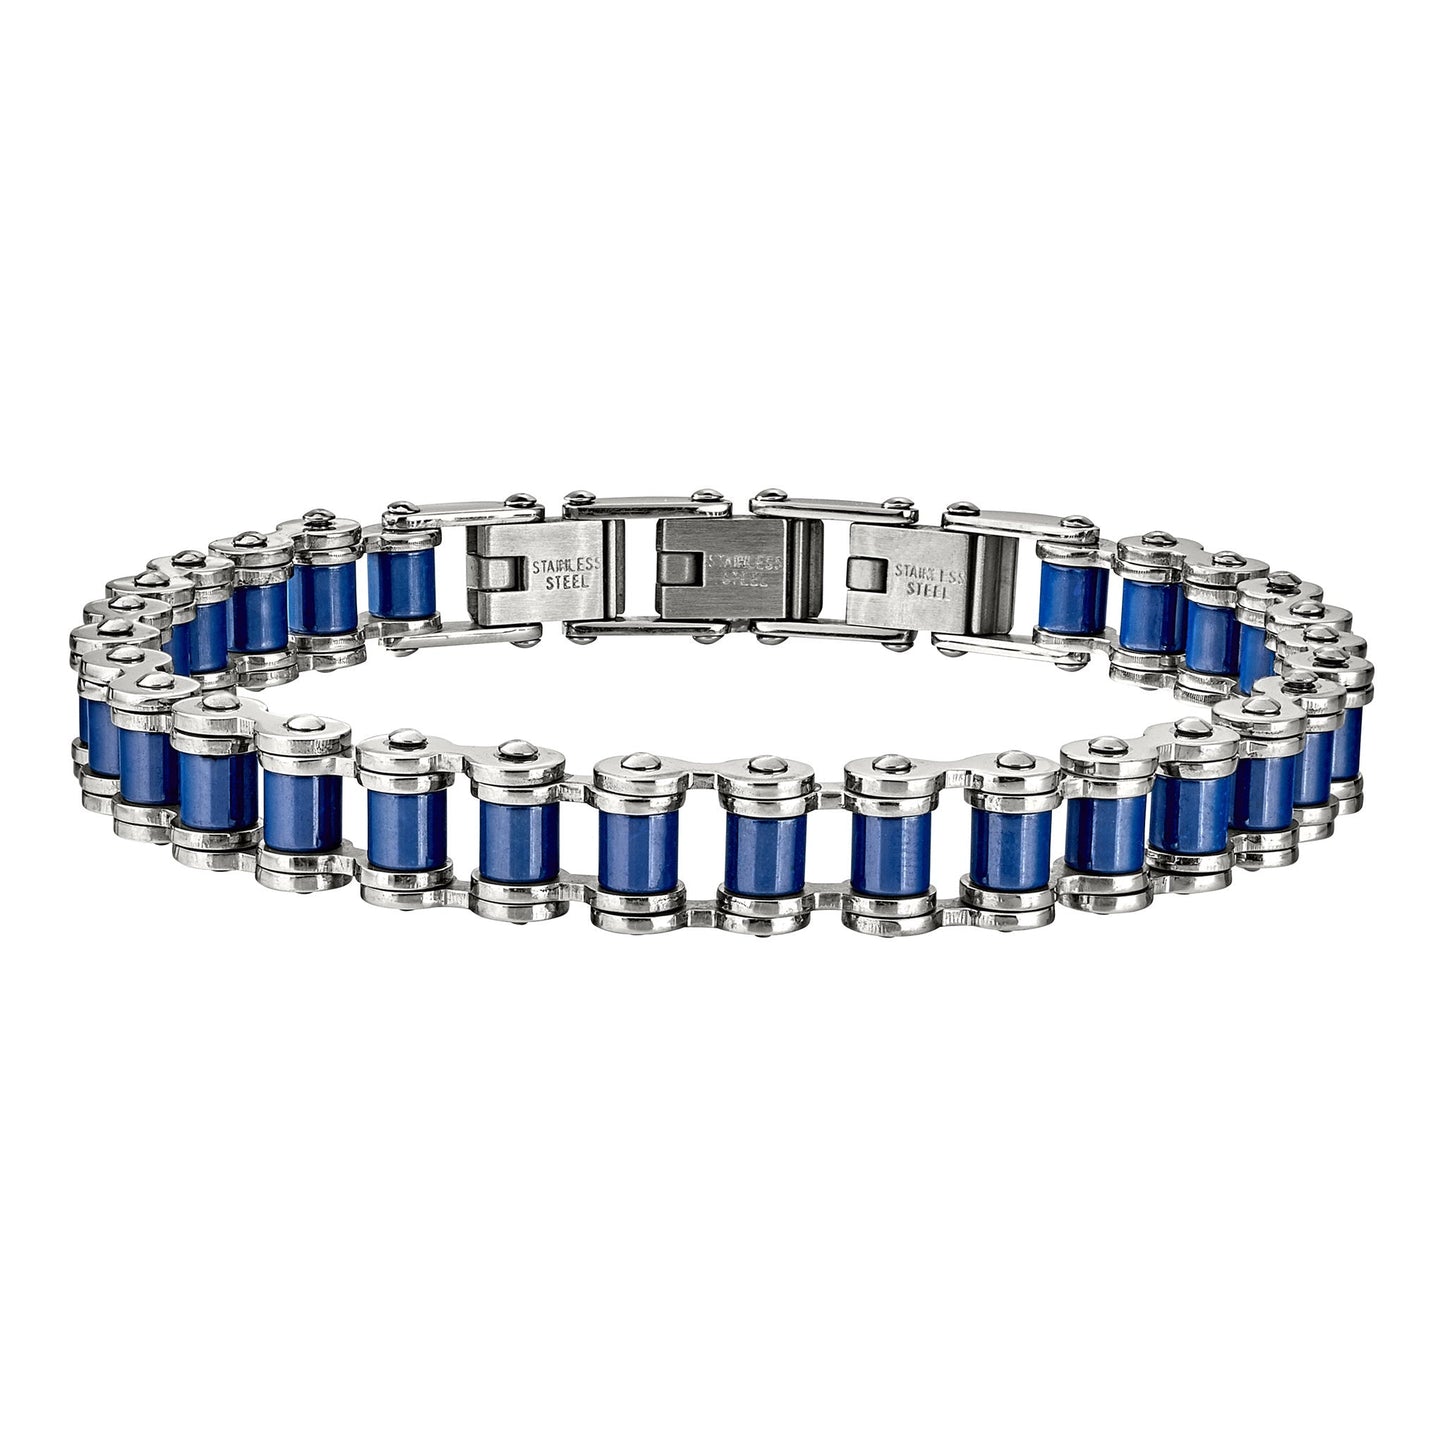 A blue & silver stainless steel biker chain bracelet displayed on a neutral white background.